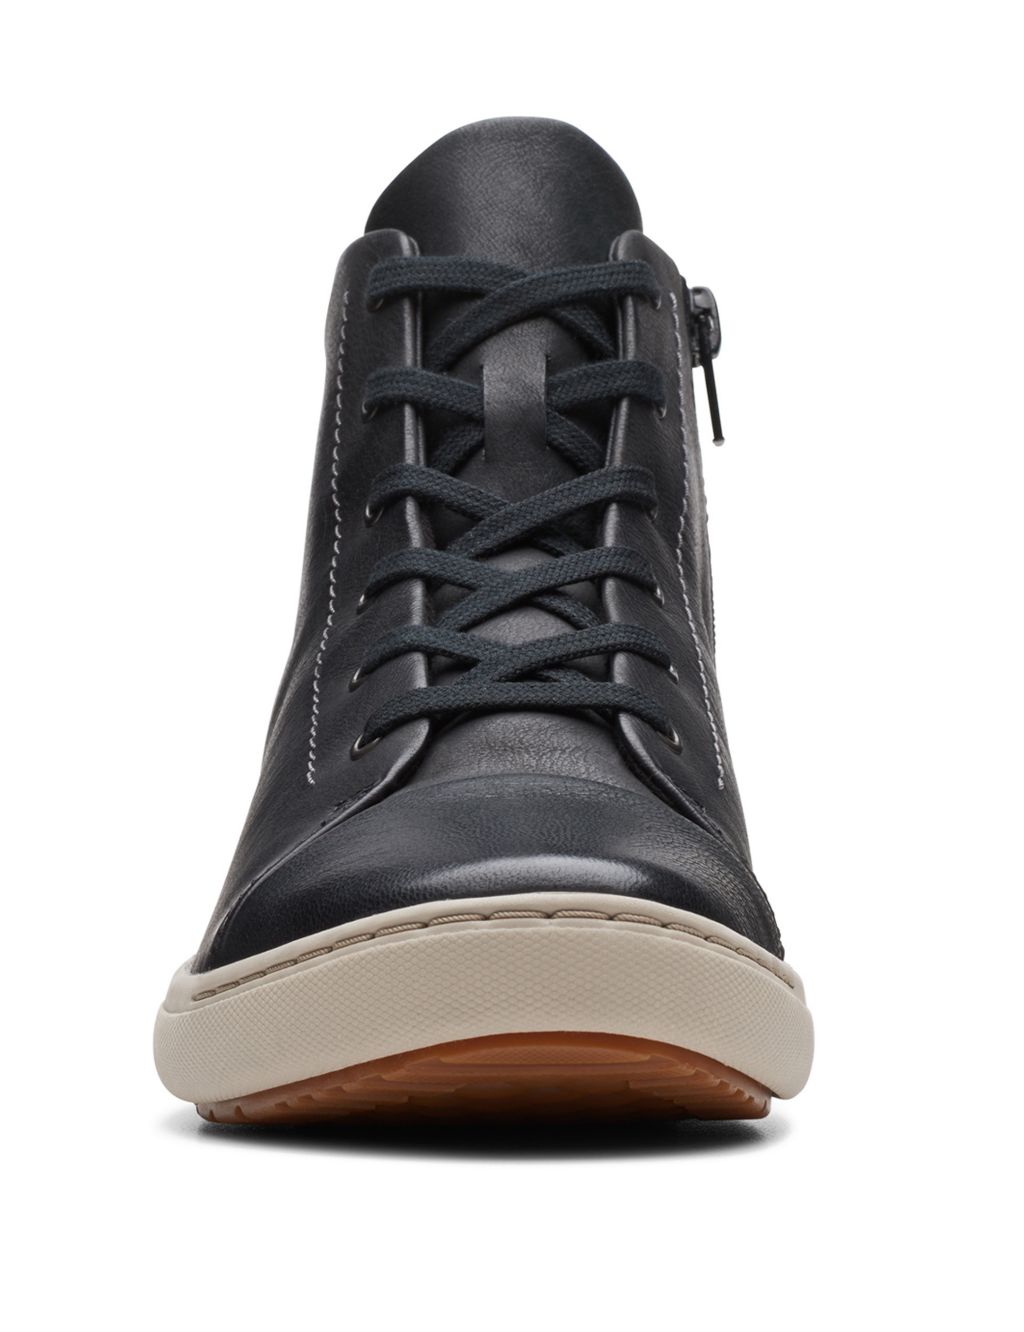 Leather Lace Up High Top Trainers image 3